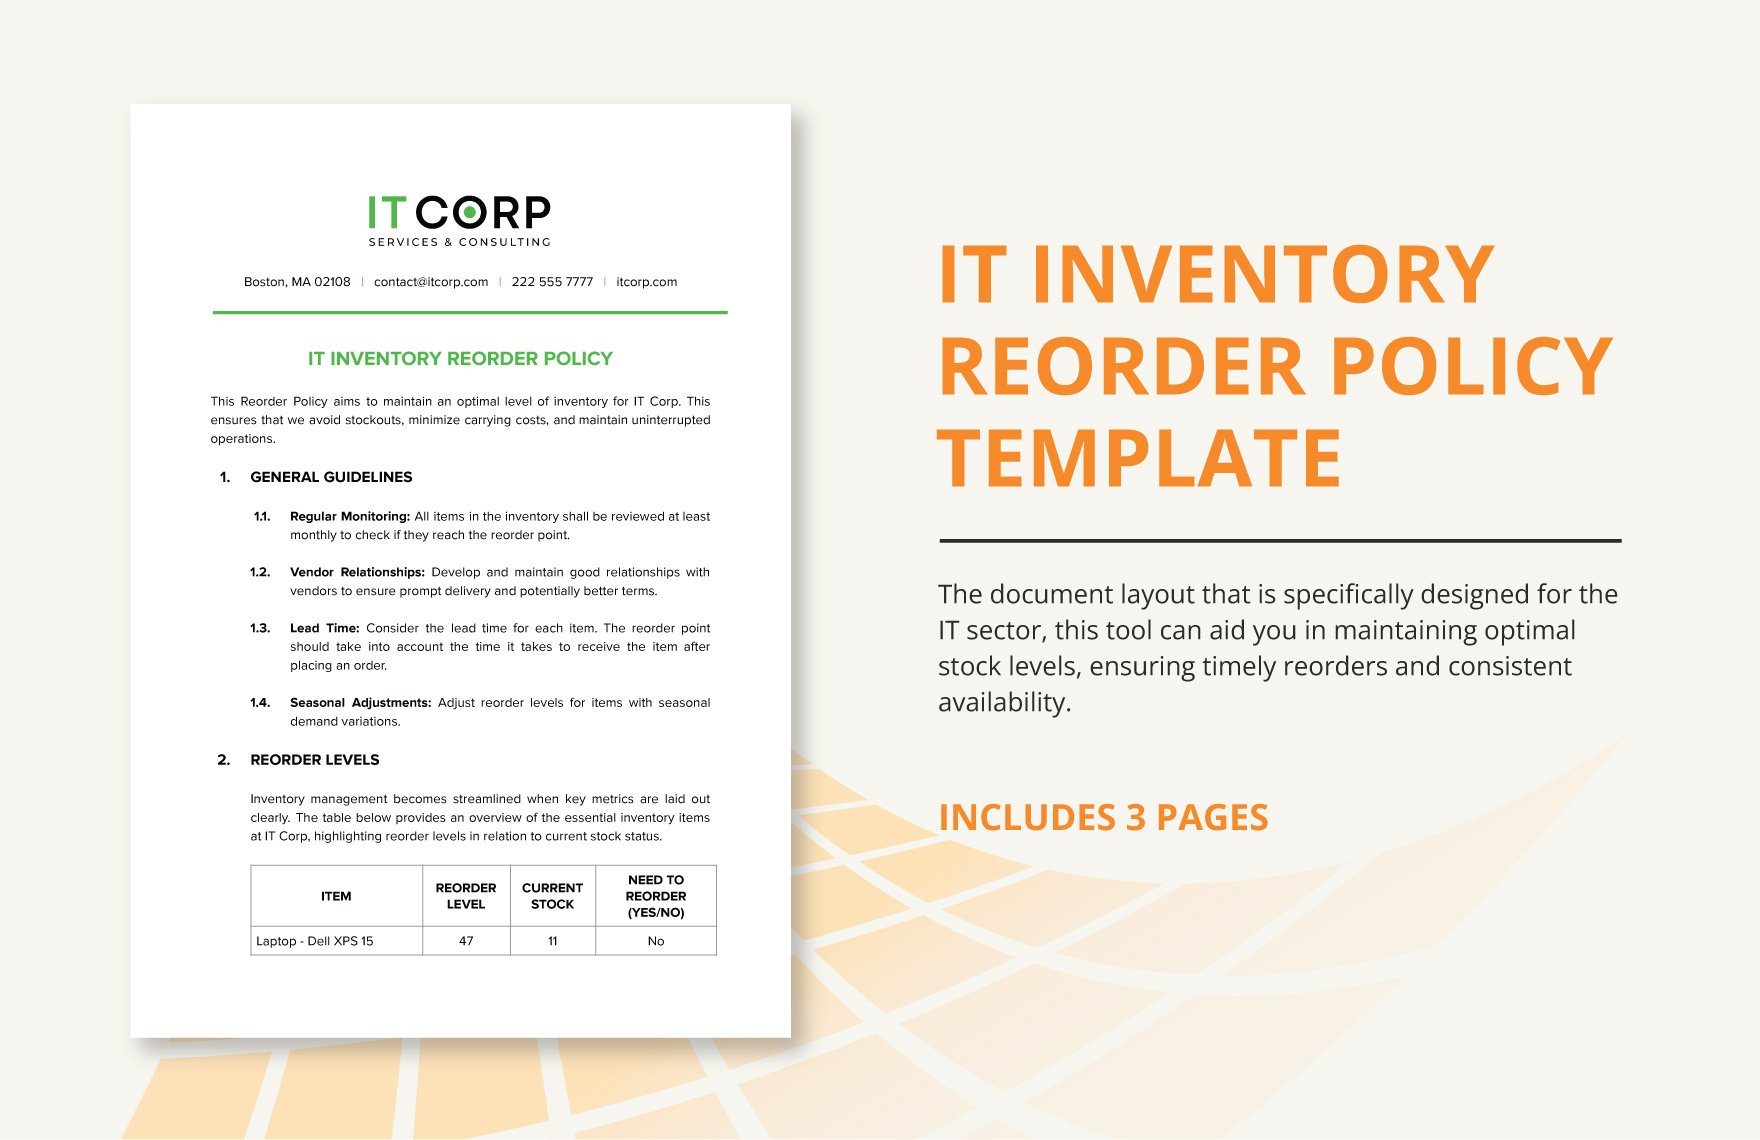 IT Inventory Reorder Policy Template